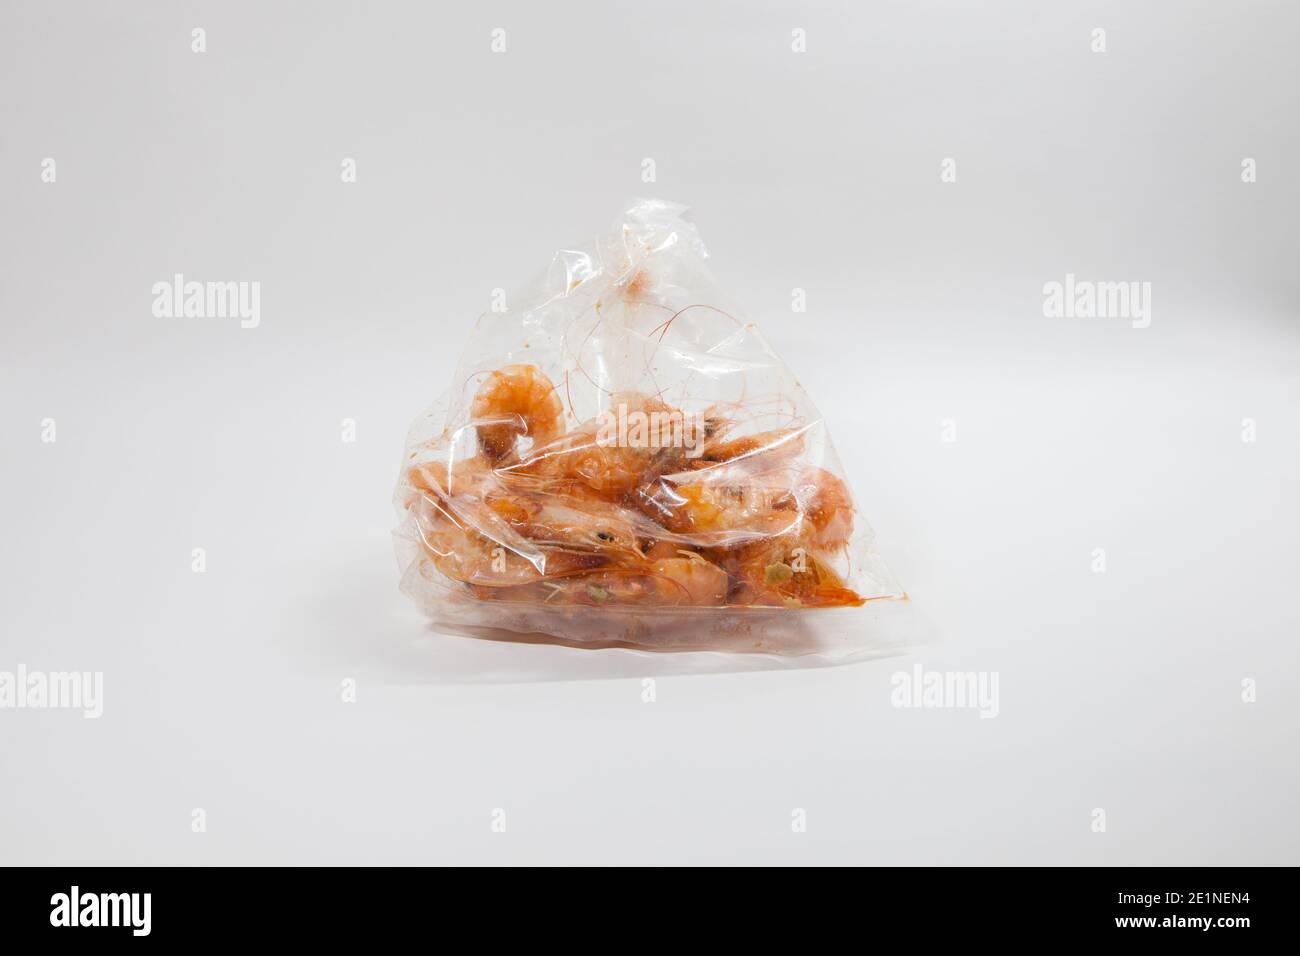 Plastic bag and food with white background Stock Photo